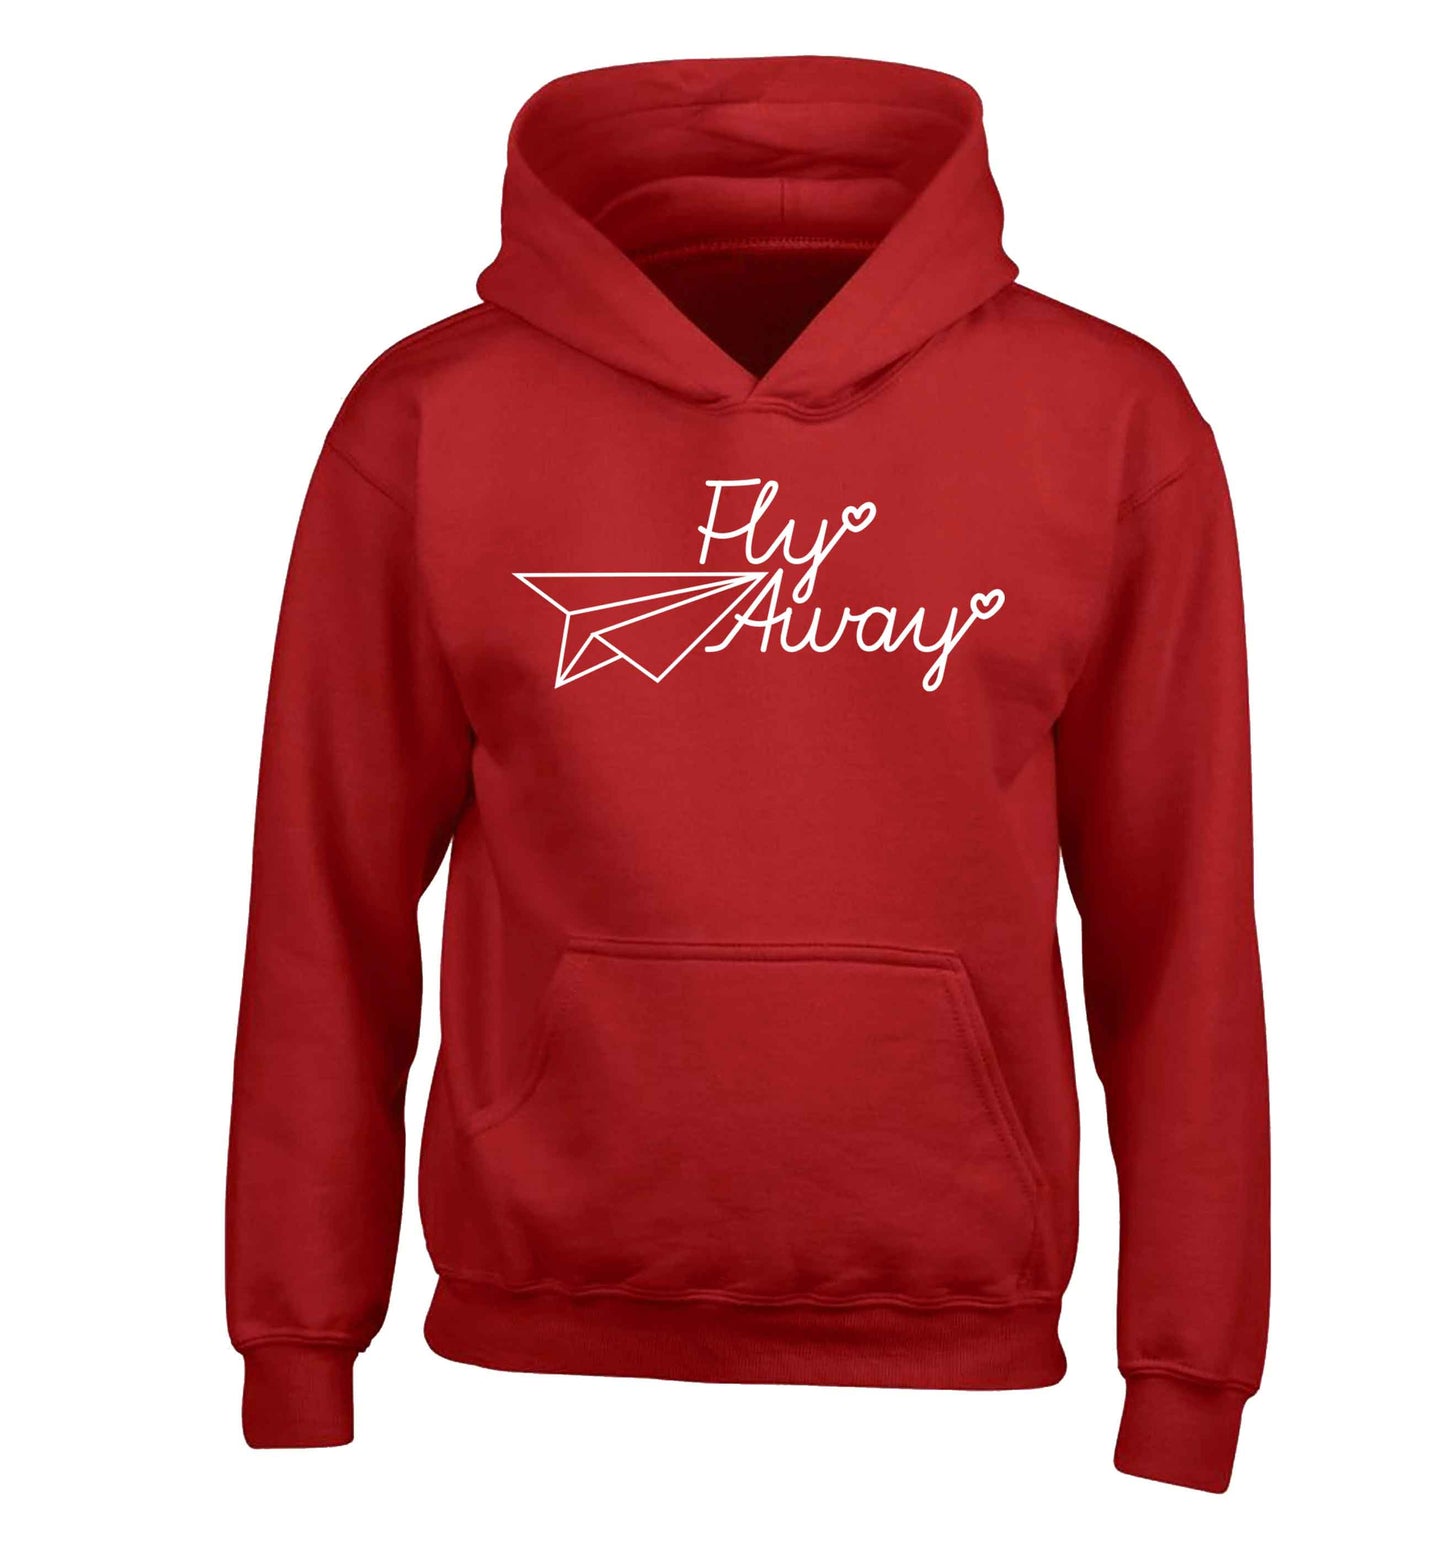 Fly away children's red hoodie 12-13 Years